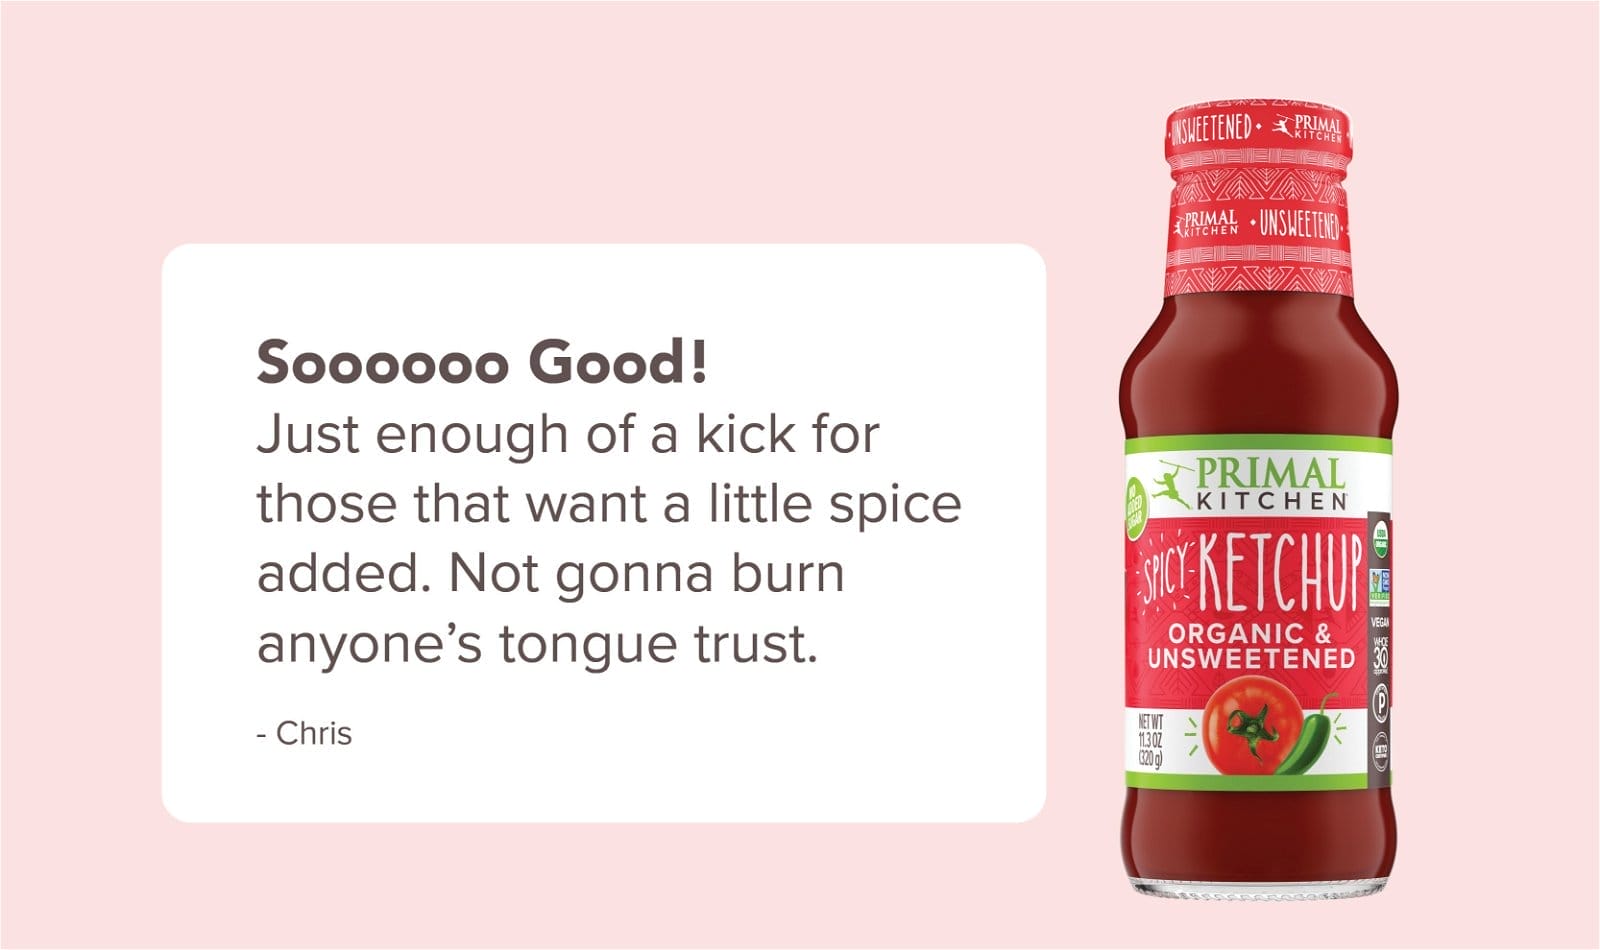 "Sooooo good! Just enough of a kick for those that want a little spicy added. Not gonna burn anyone's tongue trust." - Chris